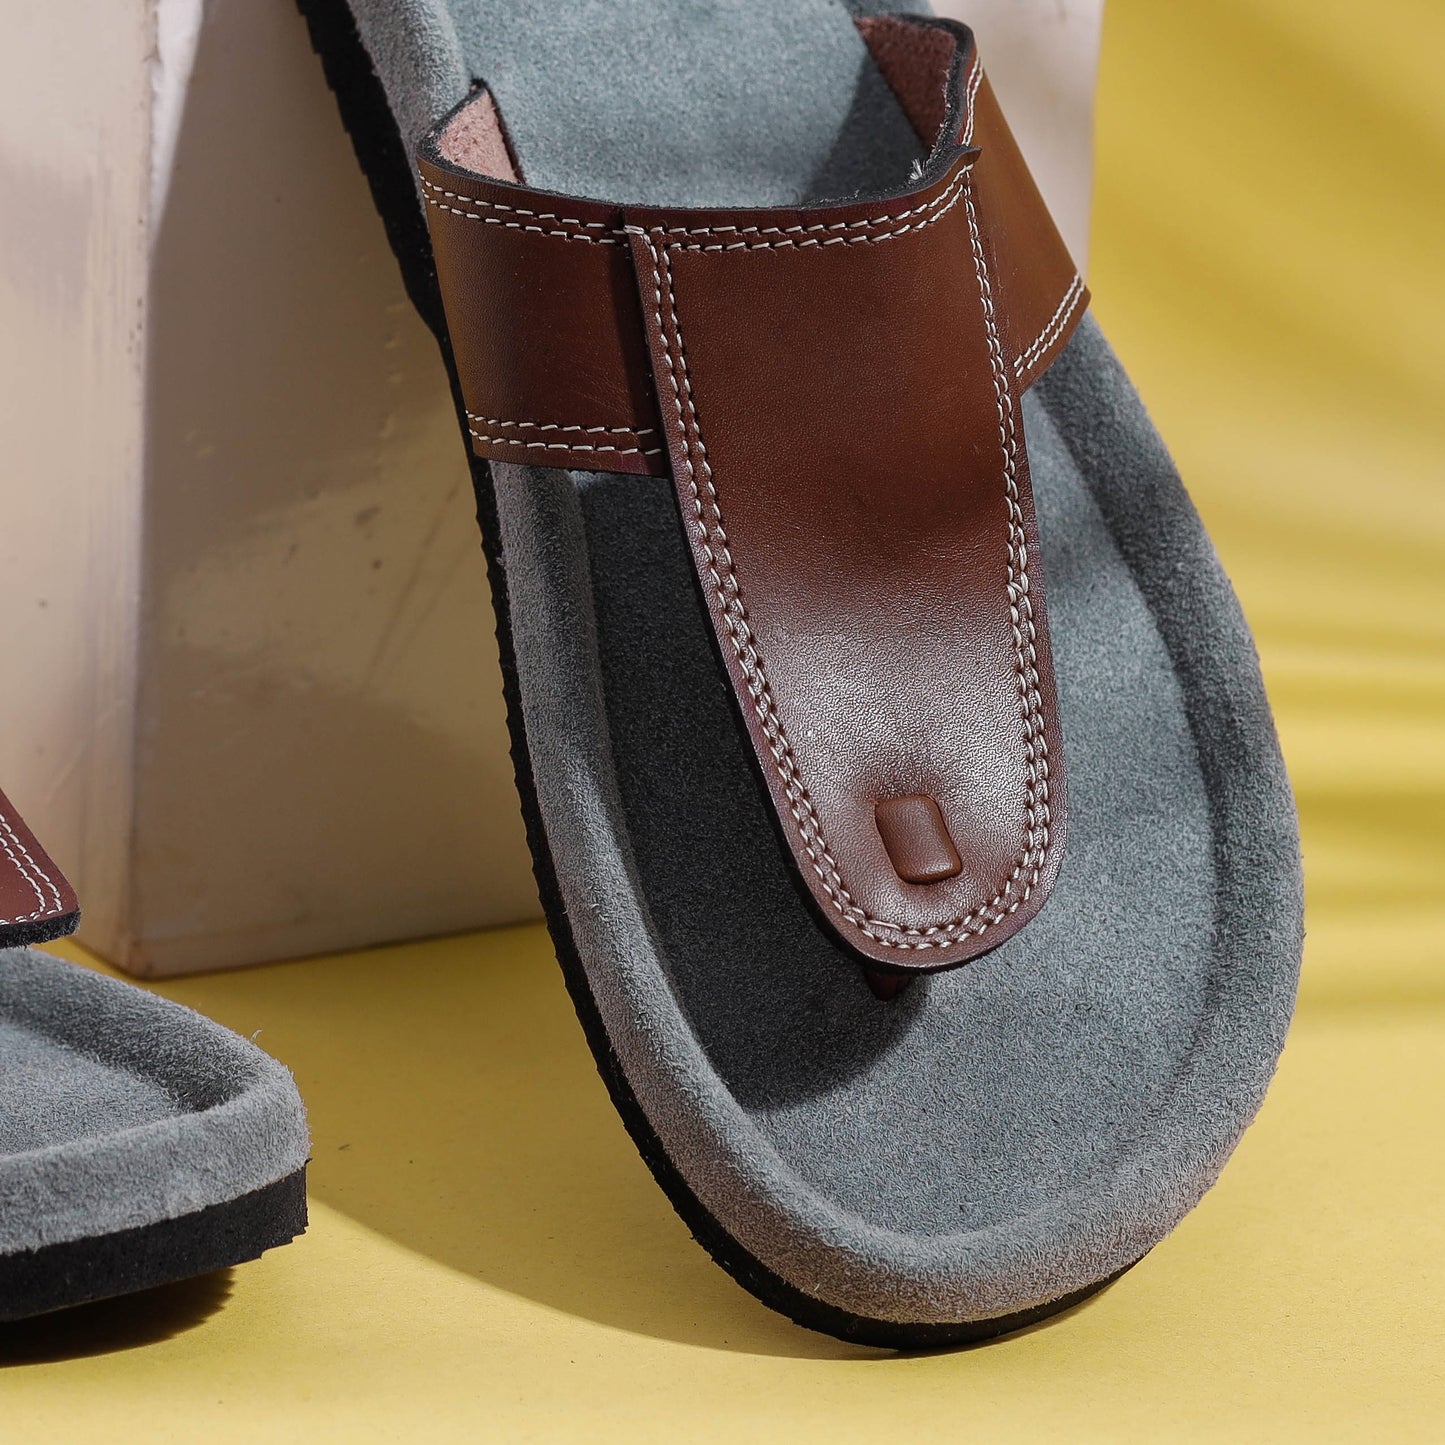 Grey & Brown Handcrafted Men's Leather Slippers with Suede